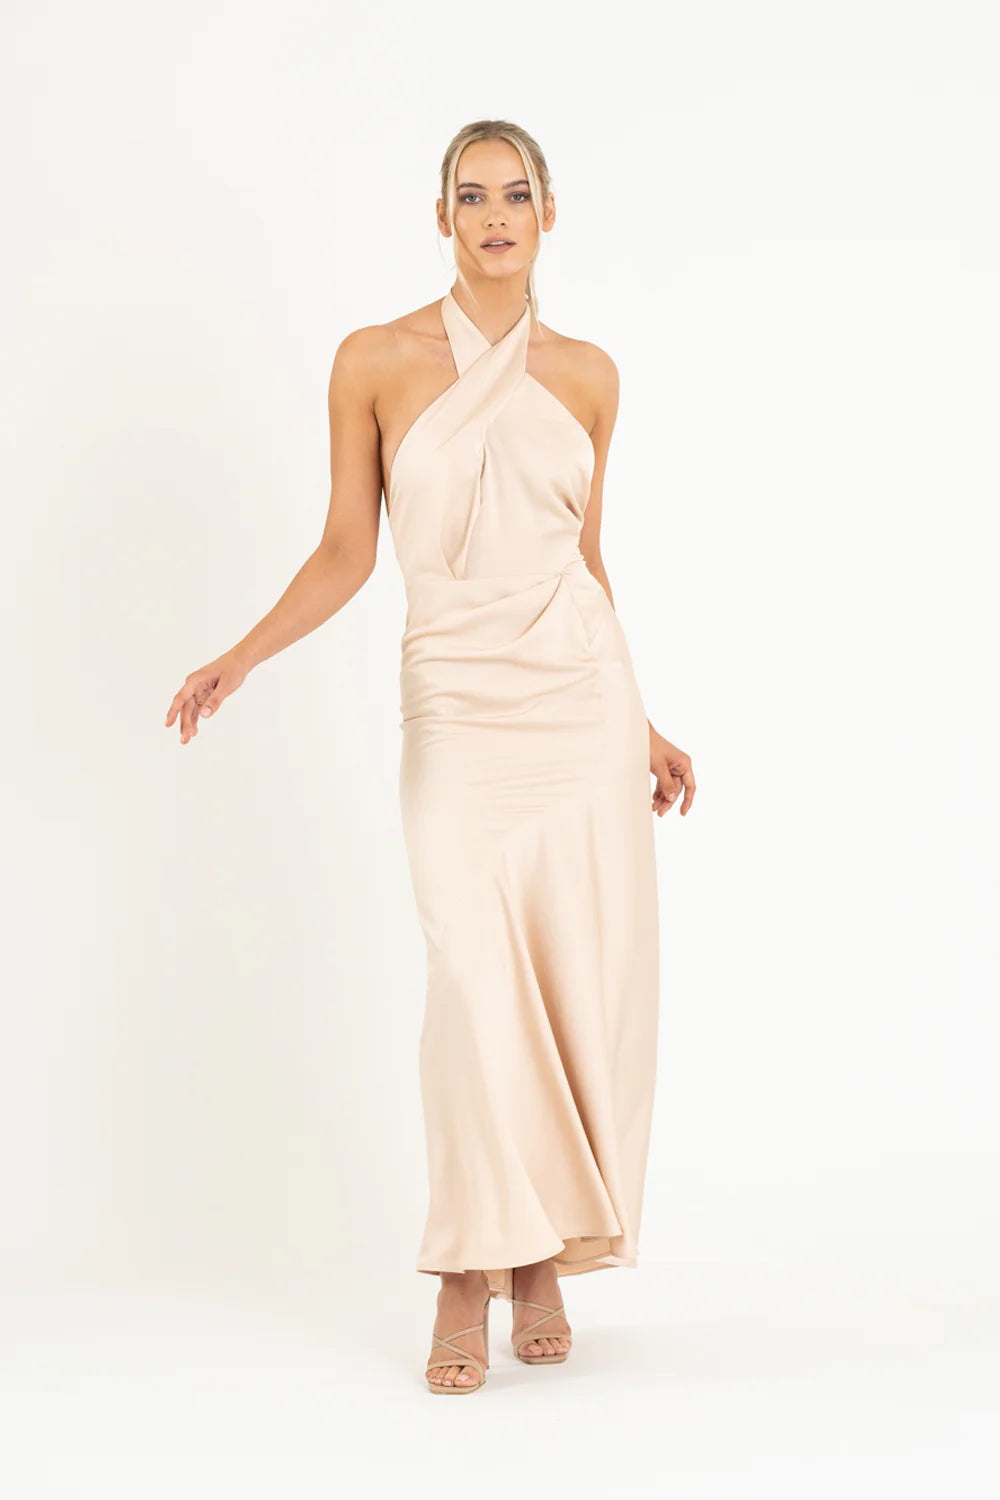 One Fell Swoop Zion Maxi, Magnolia